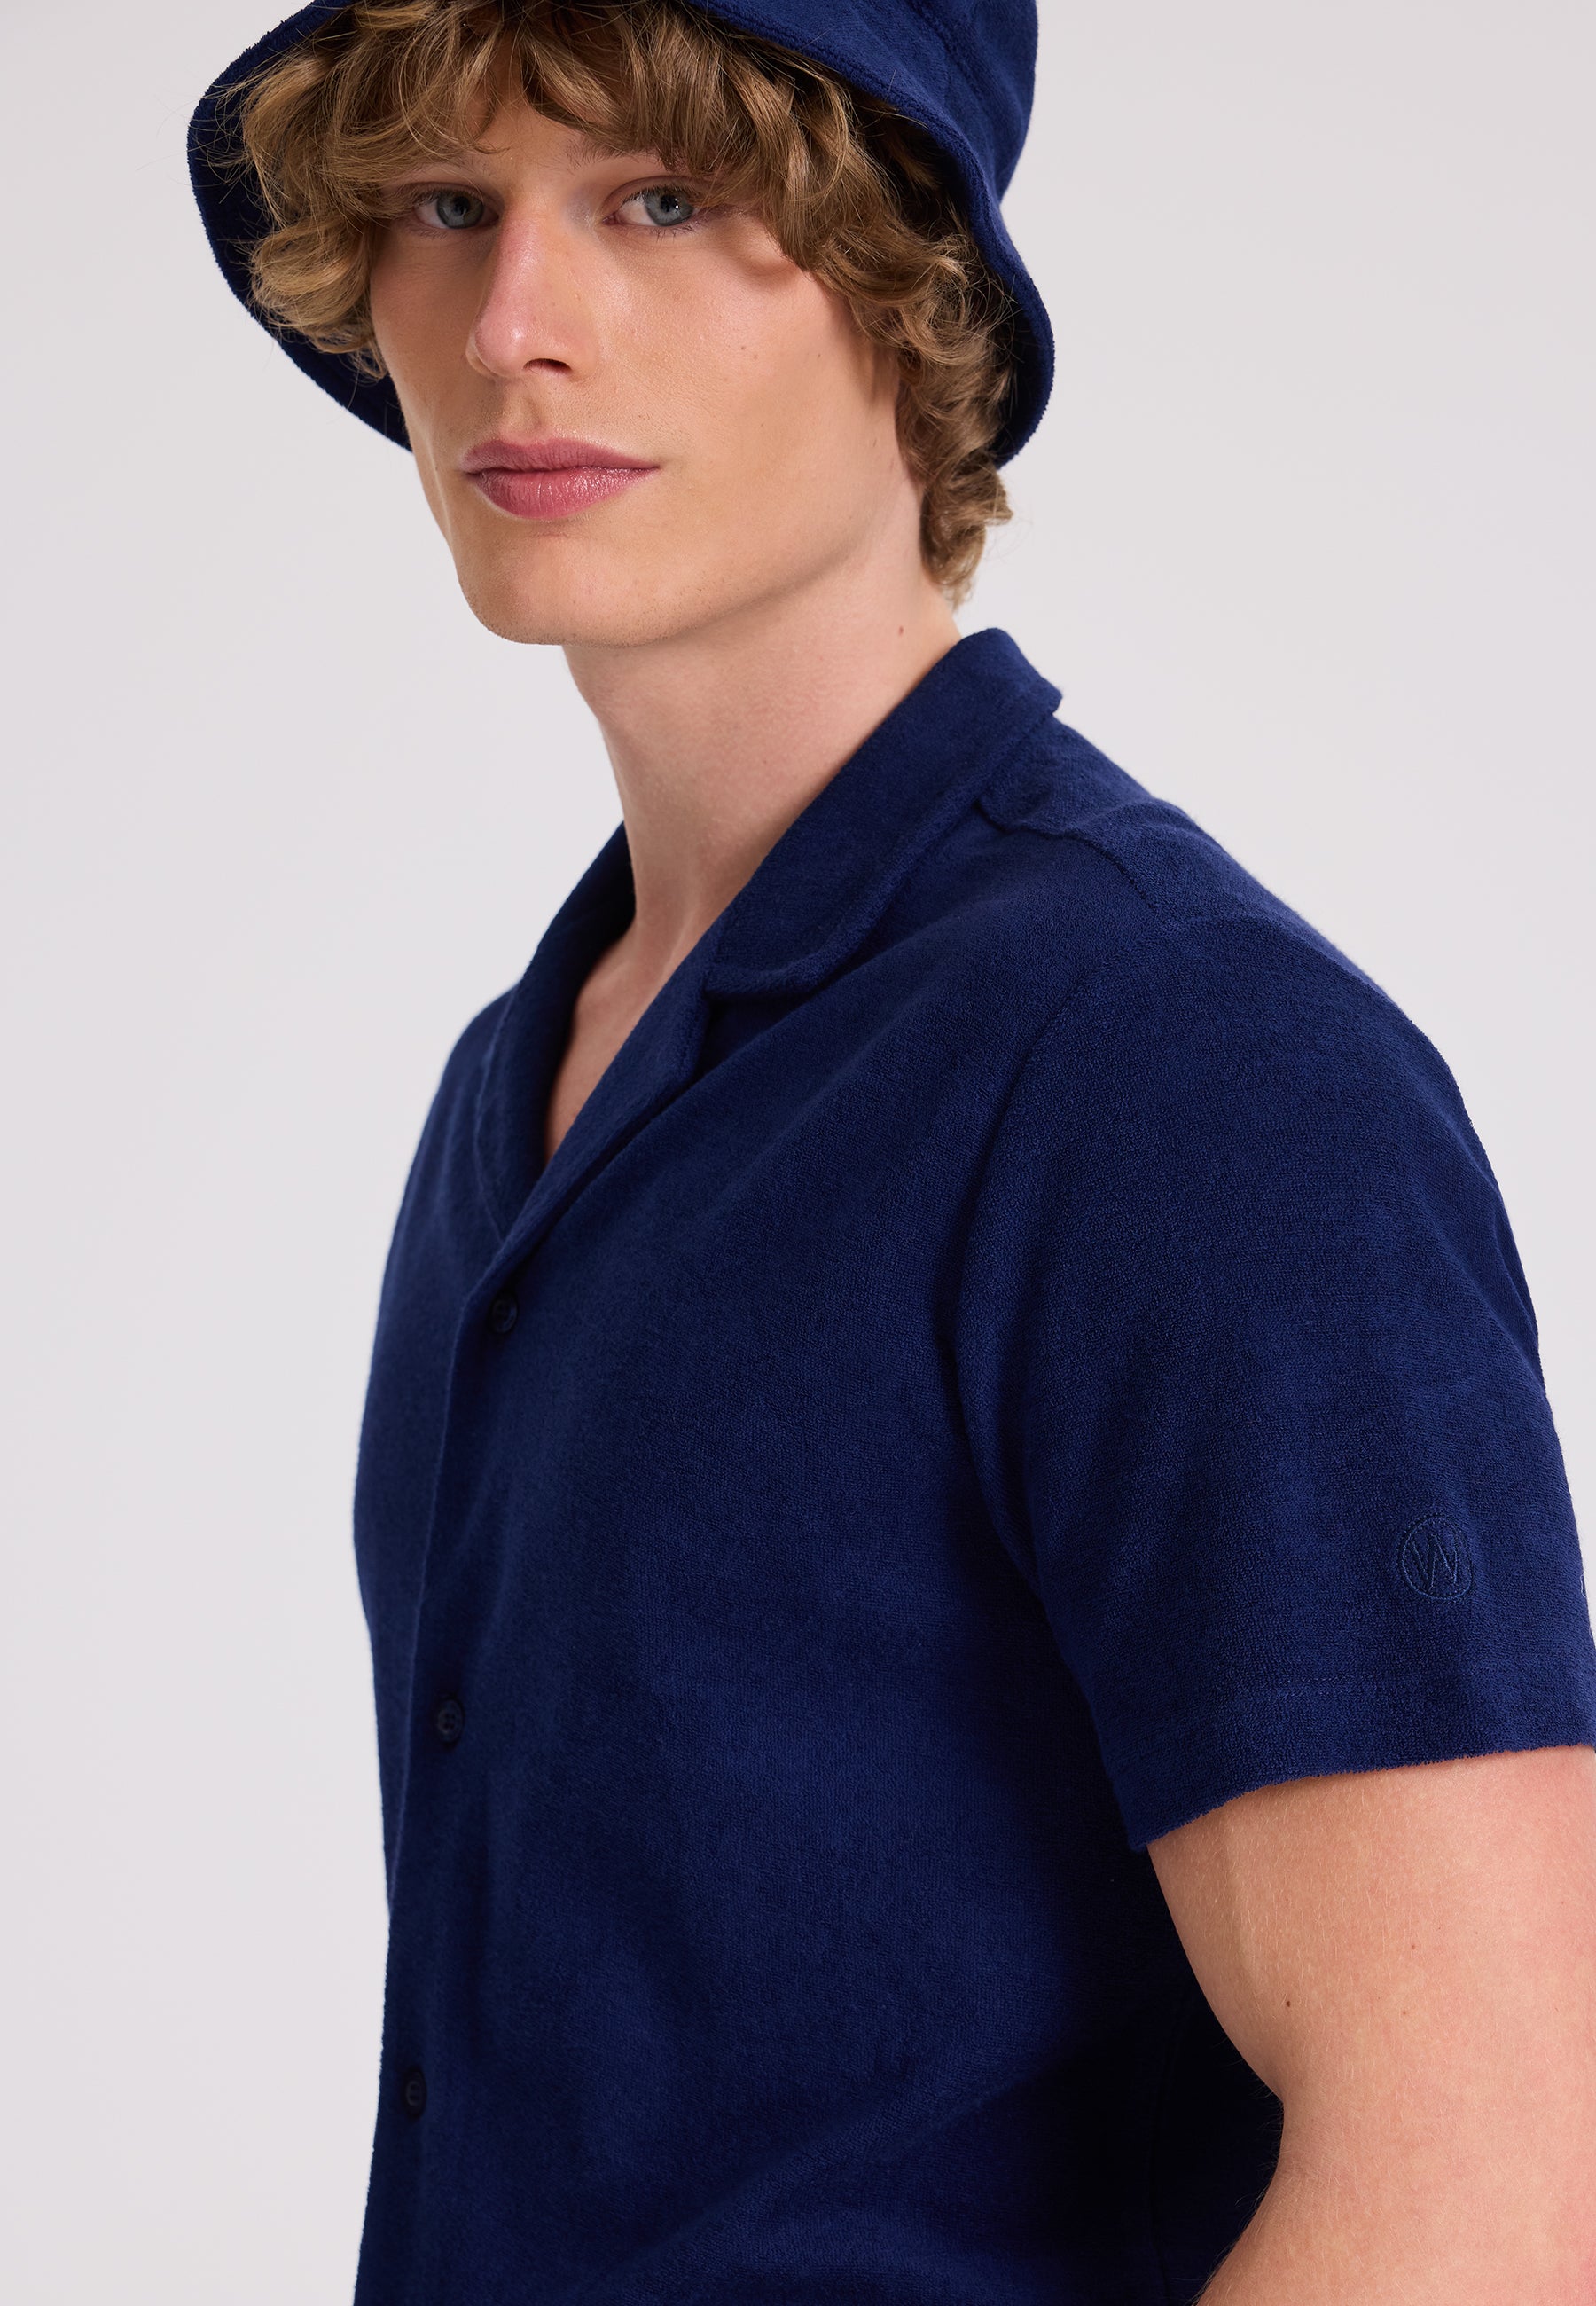 BREEZE TERRY TOWELLING S/S SHIRT in Naval Academy